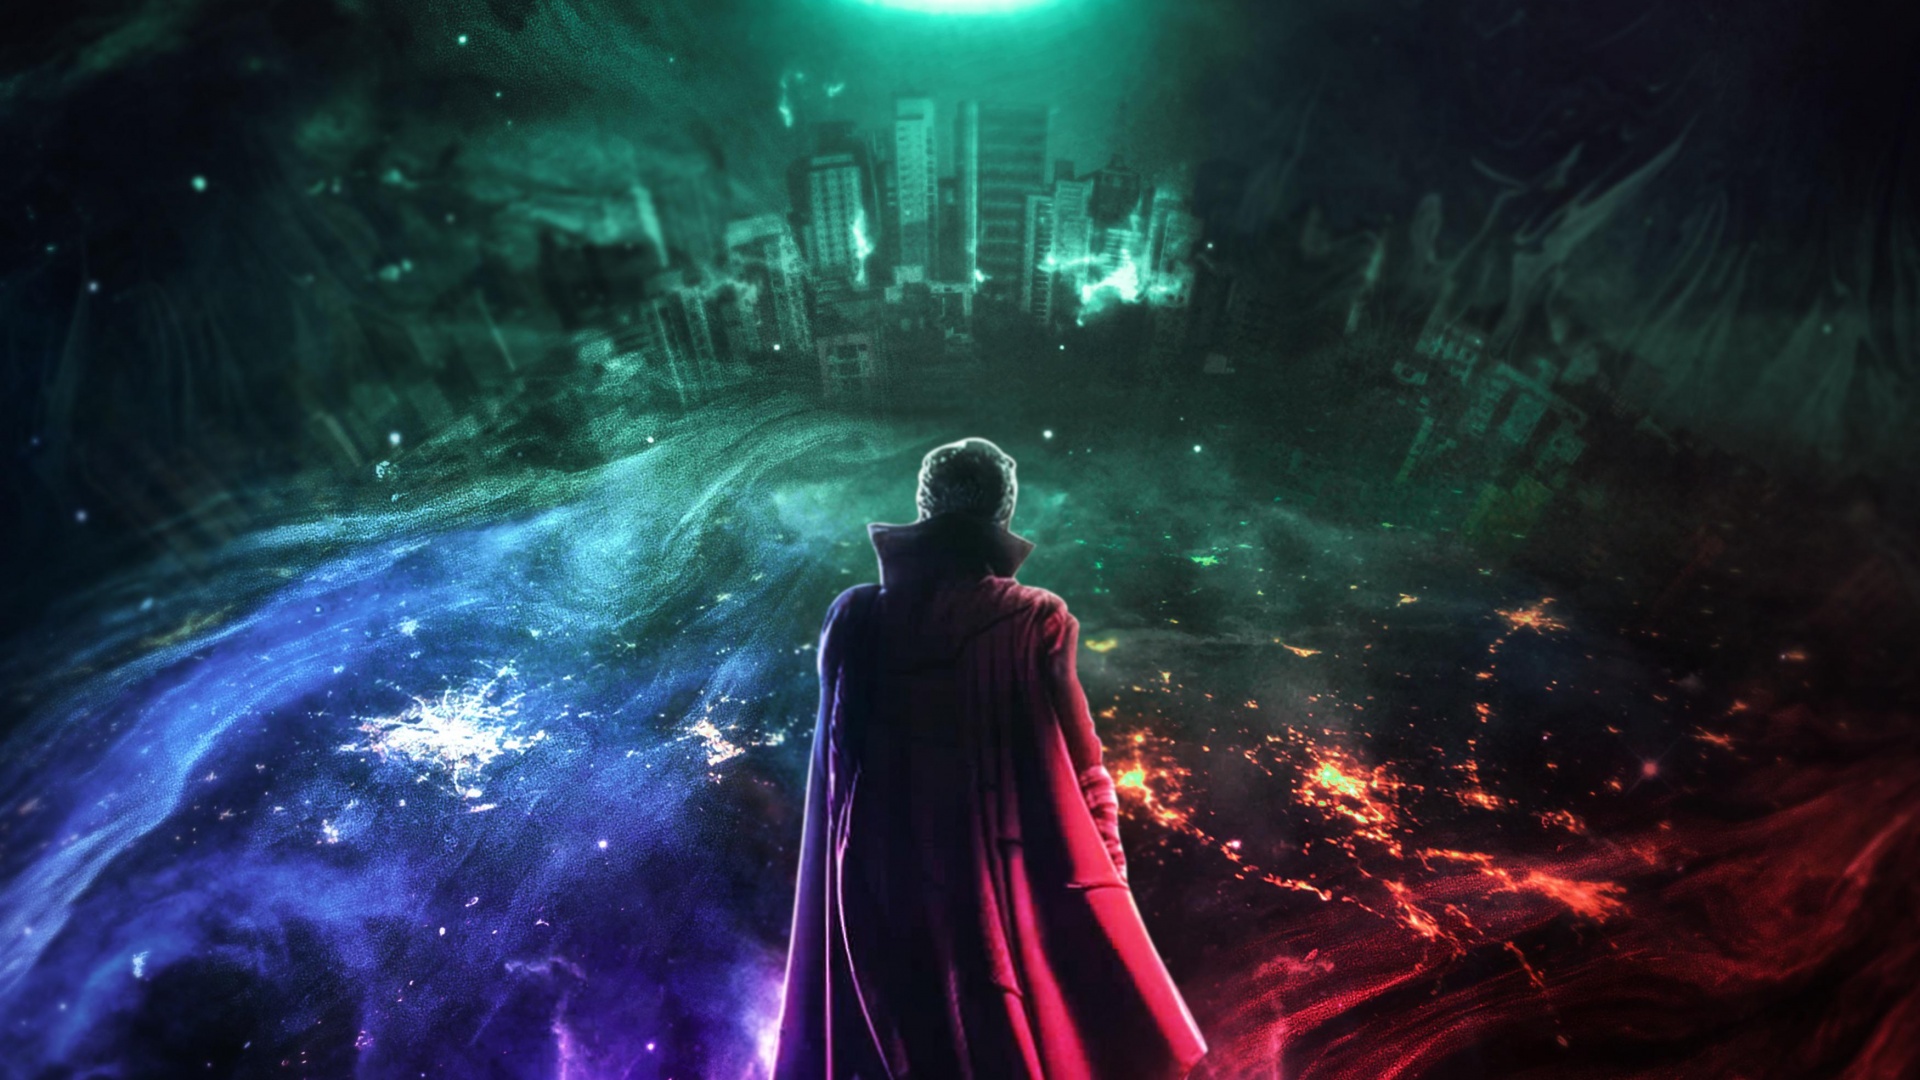 Doctor Strange in the Multiverse of Madness 4K Wallpaper, 2022 Movies, Marvel Comics